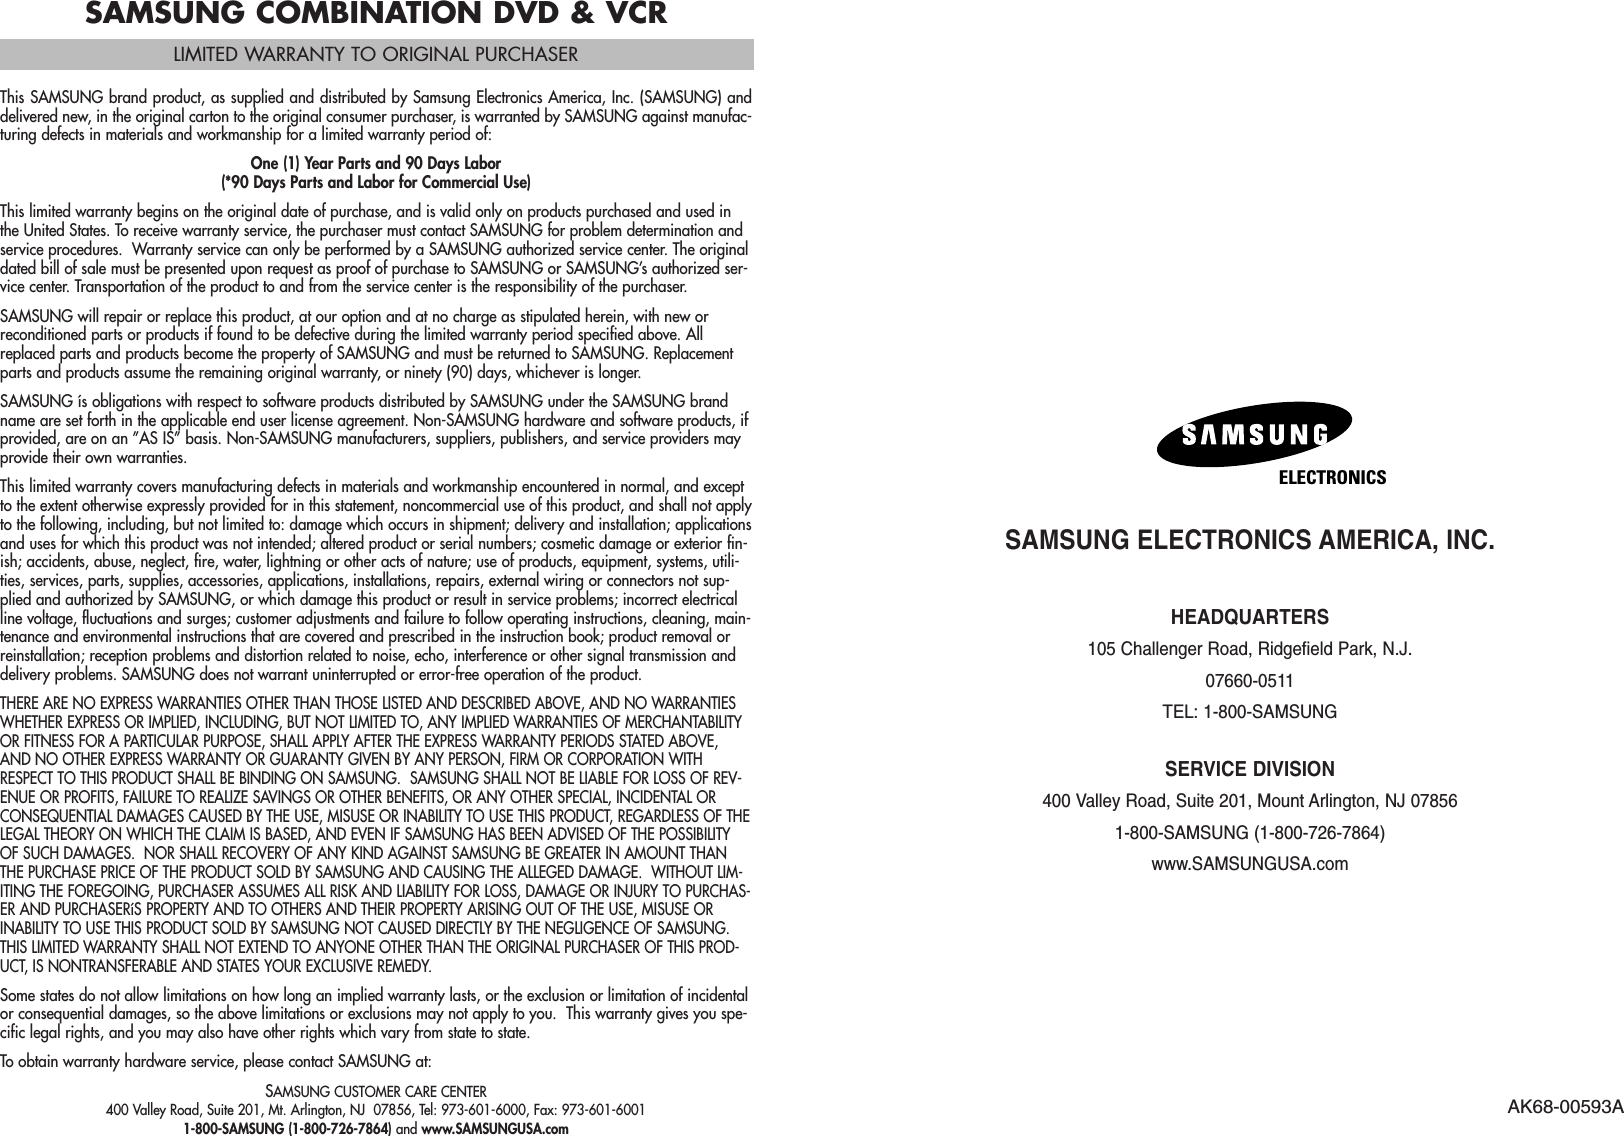 SAMSUNG ELECTRONICS AMERICA, INC.HEADQUARTERS 105 Challenger Road, Ridgefield Park, N.J. 07660-0511TEL: 1-800-SAMSUNGSERVICE DIVISION400 Valley Road, Suite 201, Mount Arlington, NJ 07856 1-800-SAMSUNG (1-800-726-7864)www.SAMSUNGUSA.comAK68-00593AELECTRONICSSAMSUNG COMBINATION DVD &amp; VCRLIMITED WARRANTY TO ORIGINAL PURCHASERThis SAMSUNG brand product, as supplied and distributed by Samsung Electronics America, Inc. (SAMSUNG) anddelivered new, in the original carton to the original consumer purchaser, is warranted by SAMSUNG against manufac-turing defects in materials and workmanship for a limited warranty period of:One (1) Year Parts and 90 Days Labor(*90 Days Parts and Labor for Commercial Use)This limited warranty begins on the original date of purchase, and is valid only on products purchased and used inthe United States. To receive warranty service, the purchaser must contact SAMSUNG for problem determination andservice procedures.  Warranty service can only be performed by a SAMSUNG authorized service center. The originaldated bill of sale must be presented upon request as proof of purchase to SAMSUNG or SAMSUNG’s authorized ser-vice center. Transportation of the product to and from the service center is the responsibility of the purchaser.SAMSUNG will repair or replace this product, at our option and at no charge as stipulated herein, with new orreconditioned parts or products if found to be defective during the limited warranty period specified above. Allreplaced parts and products become the property of SAMSUNG and must be returned to SAMSUNG. Replacementparts and products assume the remaining original warranty, or ninety (90) days, whichever is longer.SAMSUNG ís obligations with respect to software products distributed by SAMSUNG under the SAMSUNG brandname are set forth in the applicable end user license agreement. Non-SAMSUNG hardware and software products, ifprovided, are on an ”AS IS” basis. Non-SAMSUNG manufacturers, suppliers, publishers, and service providers mayprovide their own warranties.This limited warranty covers manufacturing defects in materials and workmanship encountered in normal, and exceptto the extent otherwise expressly provided for in this statement, noncommercial use of this product, and shall not applyto the following, including, but not limited to: damage which occurs in shipment; delivery and installation; applicationsand uses for which this product was not intended; altered product or serial numbers; cosmetic damage or exterior fin-ish; accidents, abuse, neglect, fire, water, lightning or other acts of nature; use of products, equipment, systems, utili-ties, services, parts, supplies, accessories, applications, installations, repairs, external wiring or connectors not sup-plied and authorized by SAMSUNG, or which damage this product or result in service problems; incorrect electricalline voltage, fluctuations and surges; customer adjustments and failure to follow operating instructions, cleaning, main-tenance and environmental instructions that are covered and prescribed in the instruction book; product removal orreinstallation; reception problems and distortion related to noise, echo, interference or other signal transmission anddelivery problems. SAMSUNG does not warrant uninterrupted or error-free operation of the product.THERE ARE NO EXPRESS WARRANTIES OTHER THAN THOSE LISTED AND DESCRIBED ABOVE, AND NO WARRANTIESWHETHER EXPRESS OR IMPLIED, INCLUDING, BUT NOT LIMITED TO, ANY IMPLIED WARRANTIES OF MERCHANTABILITYOR FITNESS FOR A PARTICULAR PURPOSE, SHALL APPLY AFTER THE EXPRESS WARRANTY PERIODS STATED ABOVE,AND NO OTHER EXPRESS WARRANTY OR GUARANTY GIVEN BY ANY PERSON, FIRM OR CORPORATION WITHRESPECT TO THIS PRODUCT SHALL BE BINDING ON SAMSUNG.  SAMSUNG SHALL NOT BE LIABLE FOR LOSS OF REV-ENUE OR PROFITS, FAILURE TO REALIZE SAVINGS OR OTHER BENEFITS, OR ANY OTHER SPECIAL, INCIDENTAL ORCONSEQUENTIAL DAMAGES CAUSED BY THE USE, MISUSE OR INABILITY TO USE THIS PRODUCT, REGARDLESS OF THELEGAL THEORY ON WHICH THE CLAIM IS BASED, AND EVEN IF SAMSUNG HAS BEEN ADVISED OF THE POSSIBILITYOF SUCH DAMAGES.  NOR SHALL RECOVERY OF ANY KIND AGAINST SAMSUNG BE GREATER IN AMOUNT THANTHE PURCHASE PRICE OF THE PRODUCT SOLD BY SAMSUNG AND CAUSING THE ALLEGED DAMAGE.  WITHOUT LIM-ITING THE FOREGOING, PURCHASER ASSUMES ALL RISK AND LIABILITY FOR LOSS, DAMAGE OR INJURY TO PURCHAS-ER AND PURCHASERíS PROPERTY AND TO OTHERS AND THEIR PROPERTY ARISING OUT OF THE USE, MISUSE ORINABILITY TO USE THIS PRODUCT SOLD BY SAMSUNG NOT CAUSED DIRECTLY BY THE NEGLIGENCE OF SAMSUNG.THIS LIMITED WARRANTY SHALL NOT EXTEND TO ANYONE OTHER THAN THE ORIGINAL PURCHASER OF THIS PROD-UCT, IS NONTRANSFERABLE AND STATES YOUR EXCLUSIVE REMEDY.Some states do not allow limitations on how long an implied warranty lasts, or the exclusion or limitation of incidentalor consequential damages, so the above limitations or exclusions may not apply to you.  This warranty gives you spe-cific legal rights, and you may also have other rights which vary from state to state.To obtain warranty hardware service, please contact SAMSUNG at:SAMSUNG CUSTOMER CARE CENTER400 Valley Road, Suite 201, Mt. Arlington, NJ  07856, Tel: 973-601-6000, Fax: 973-601-60011-800-SAMSUNG (1-800-726-7864) and www.SAMSUNGUSA.com